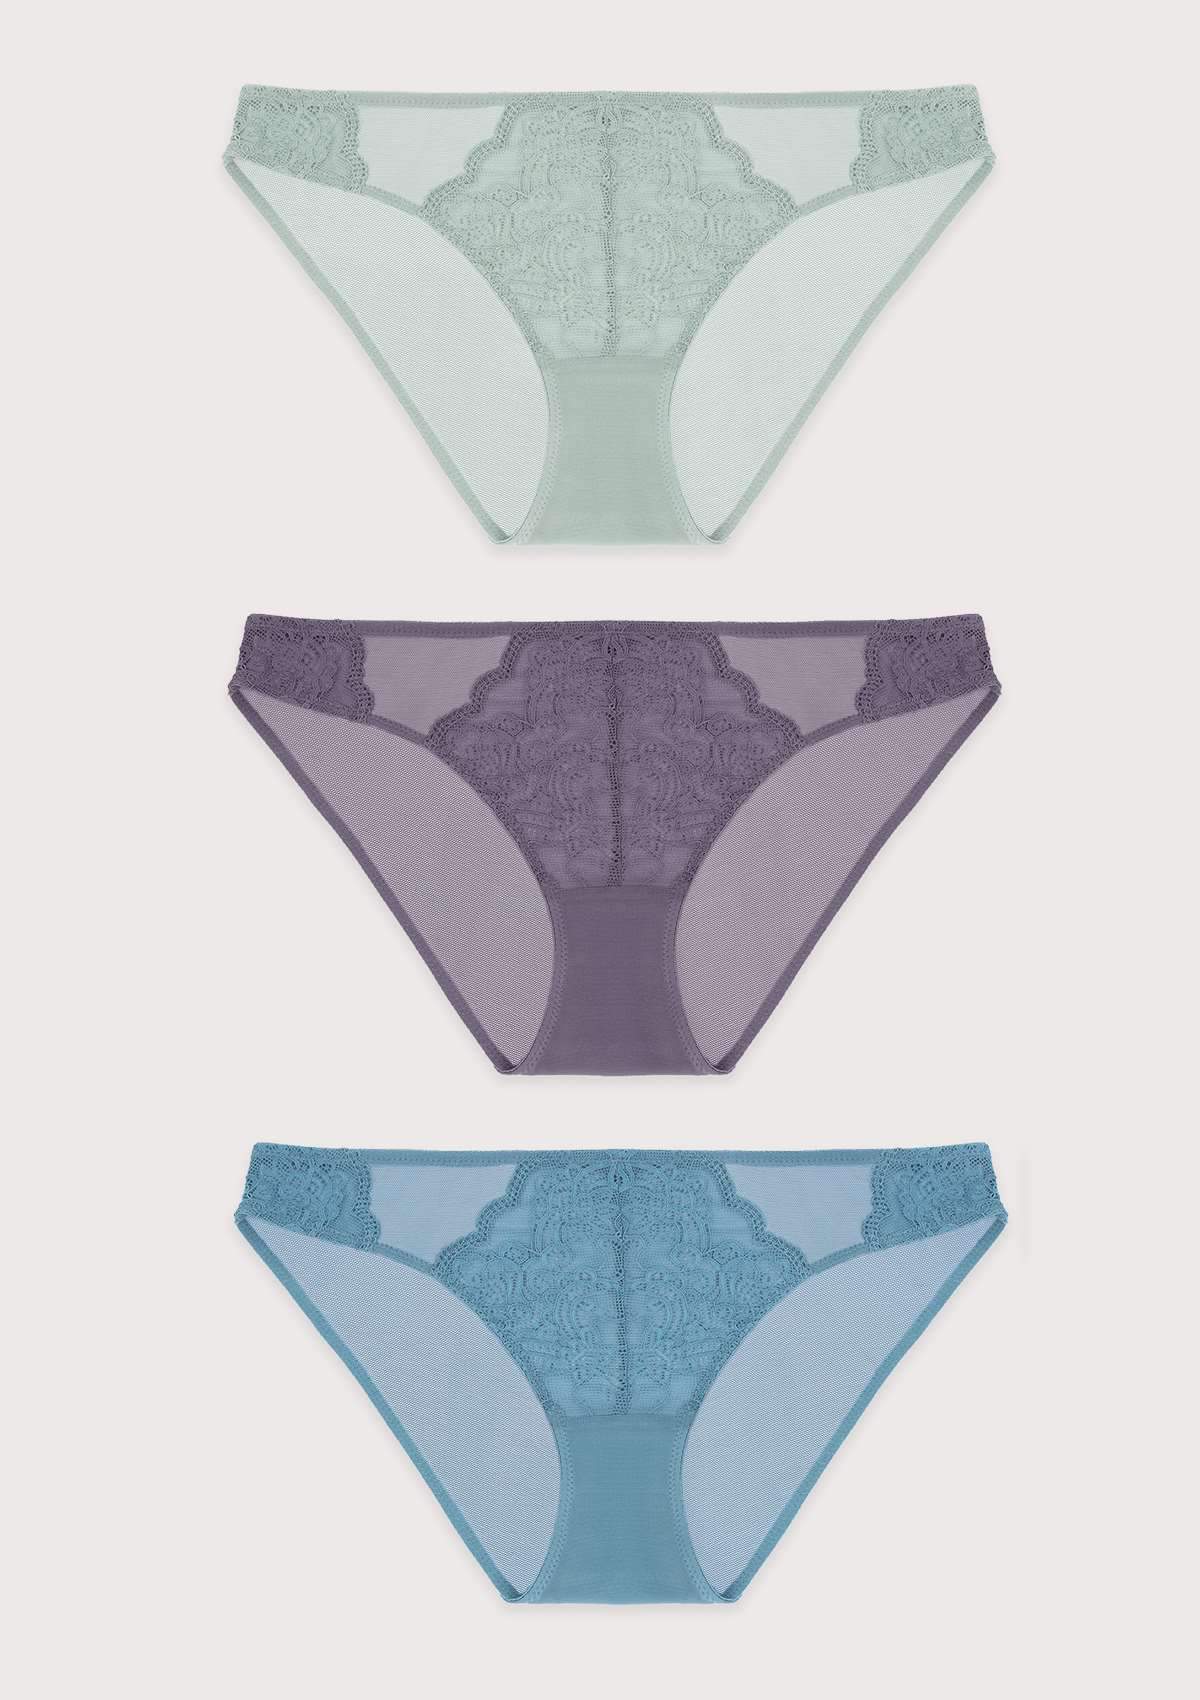 HSIA Floral Lace Front And Sheer Mesh Back Airy Bikini Panties -3 Pack - XL / Green+Purple+Blue